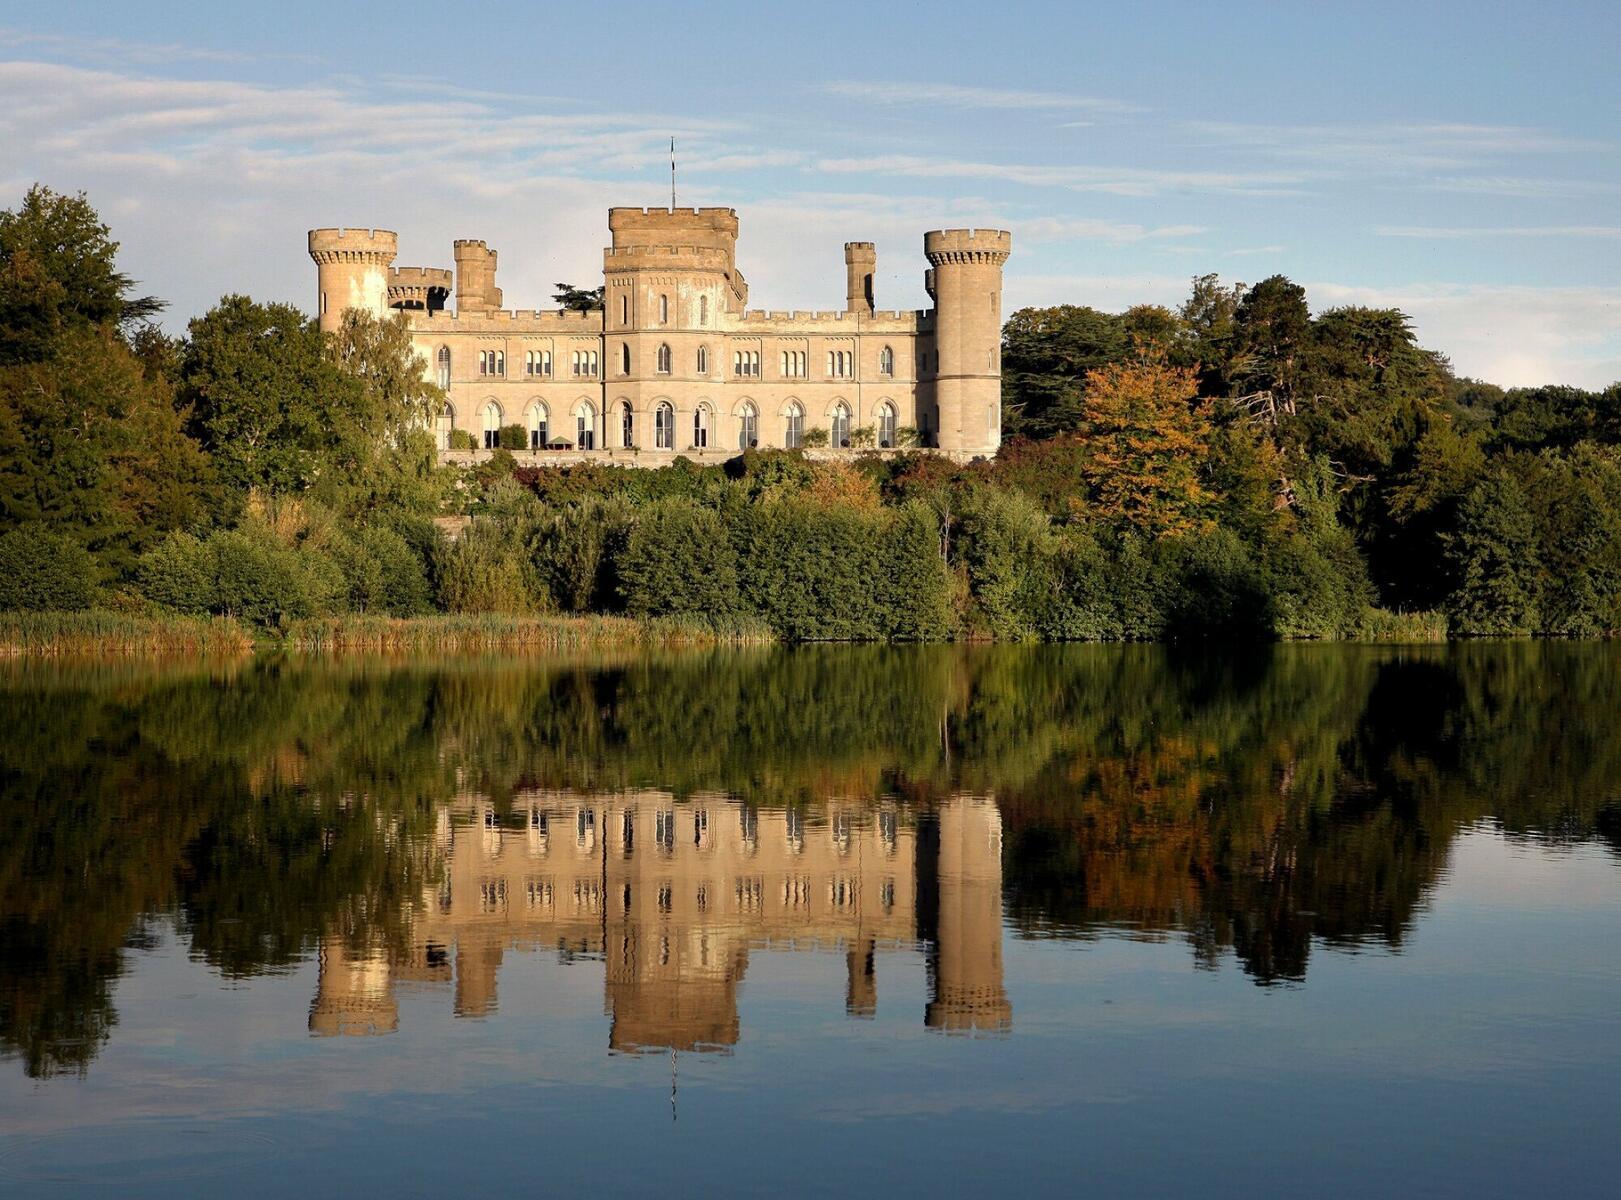 Eastnor Castle and its reflection in a lake